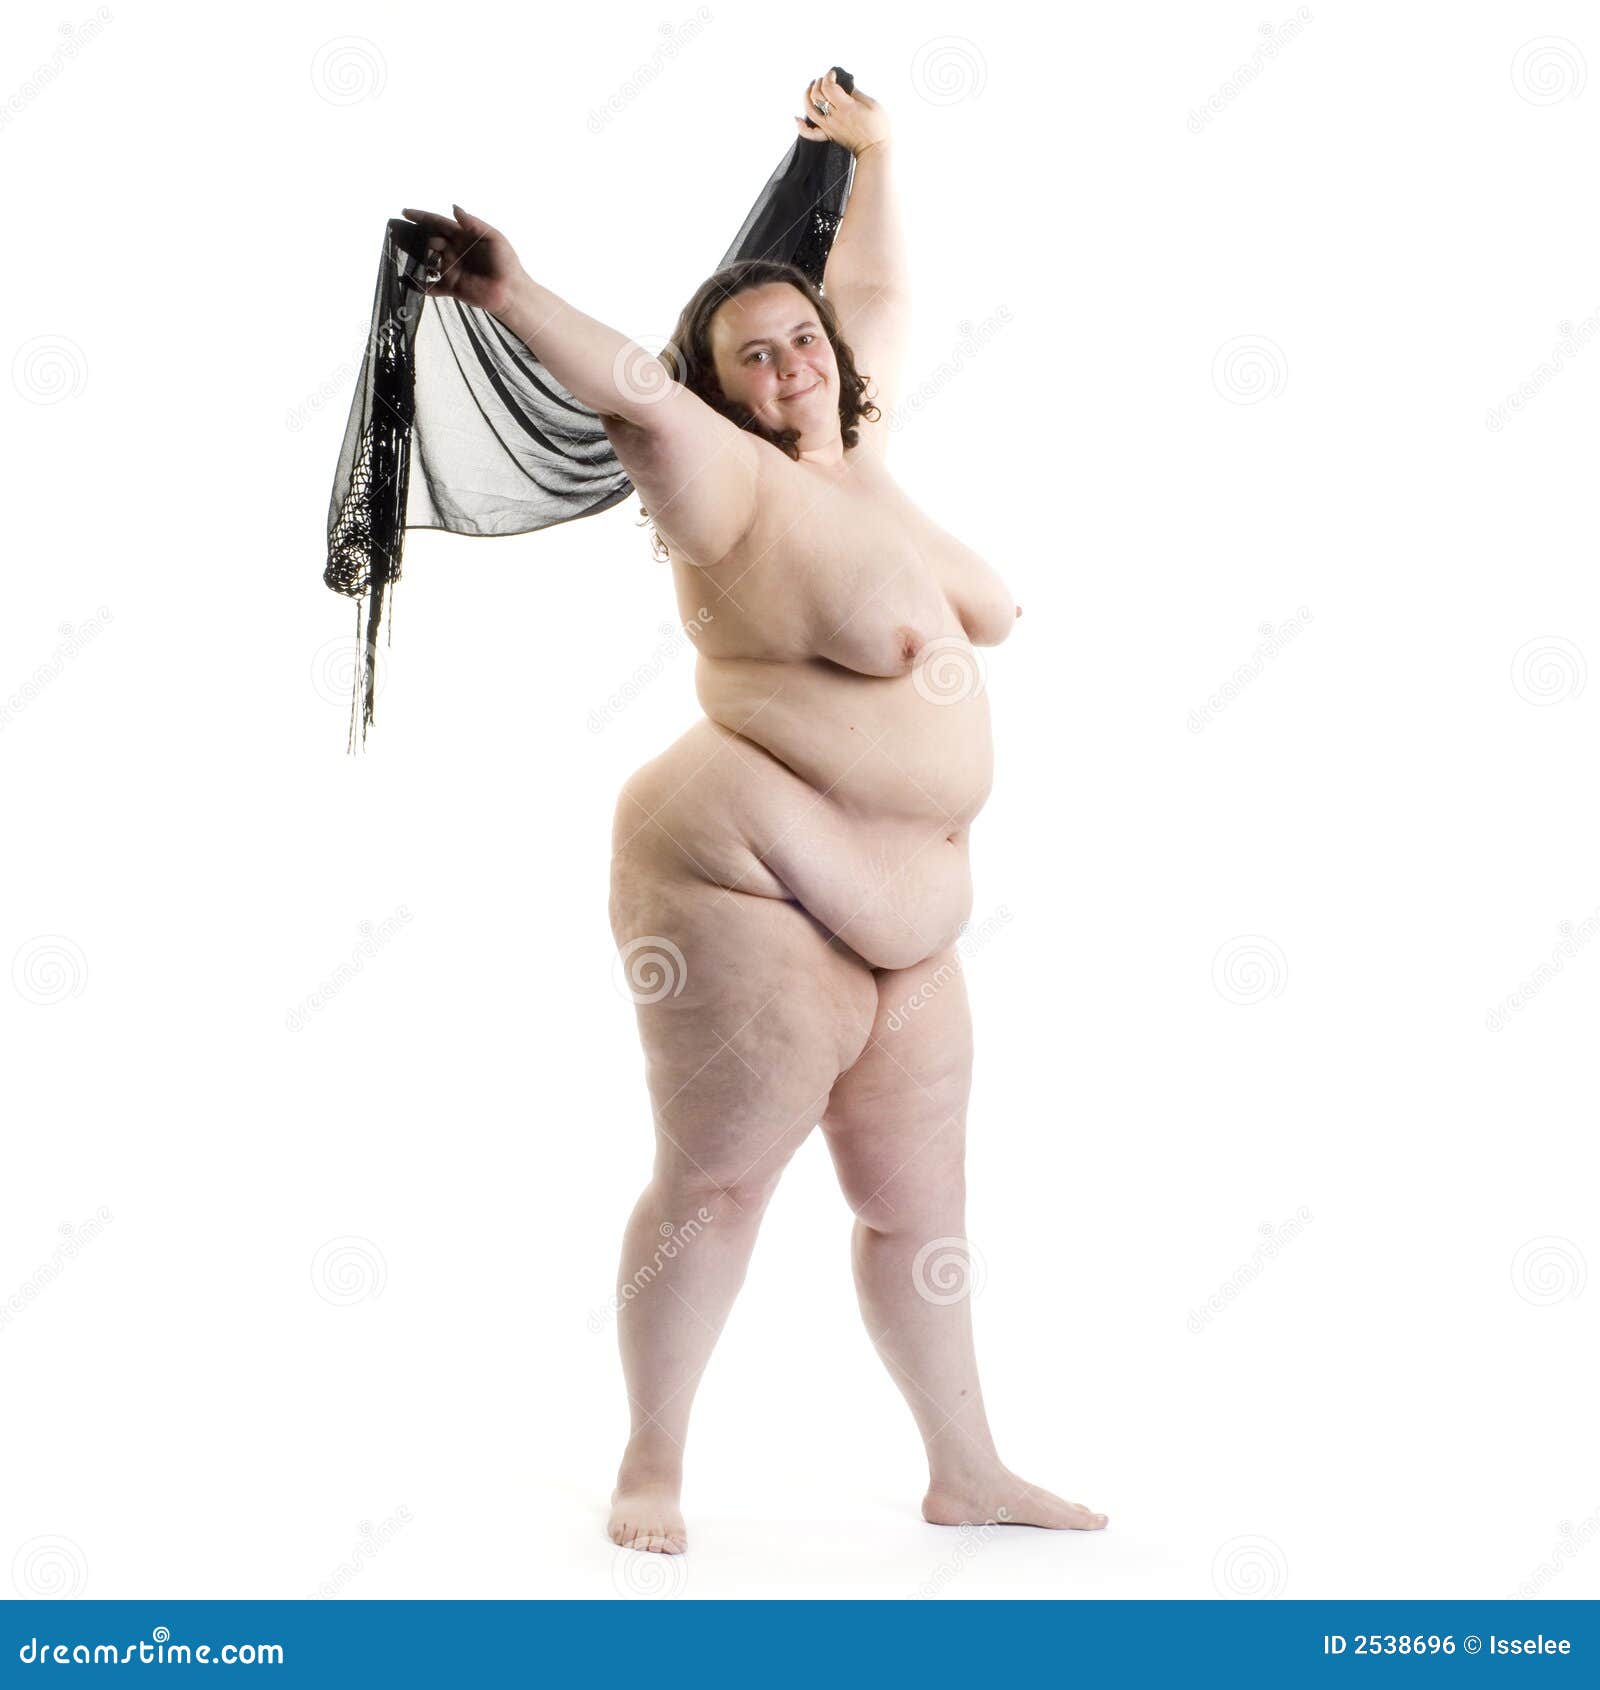 obese female nude Artist Yossi Loloi Celebrates Naked Obese Women in Full ...